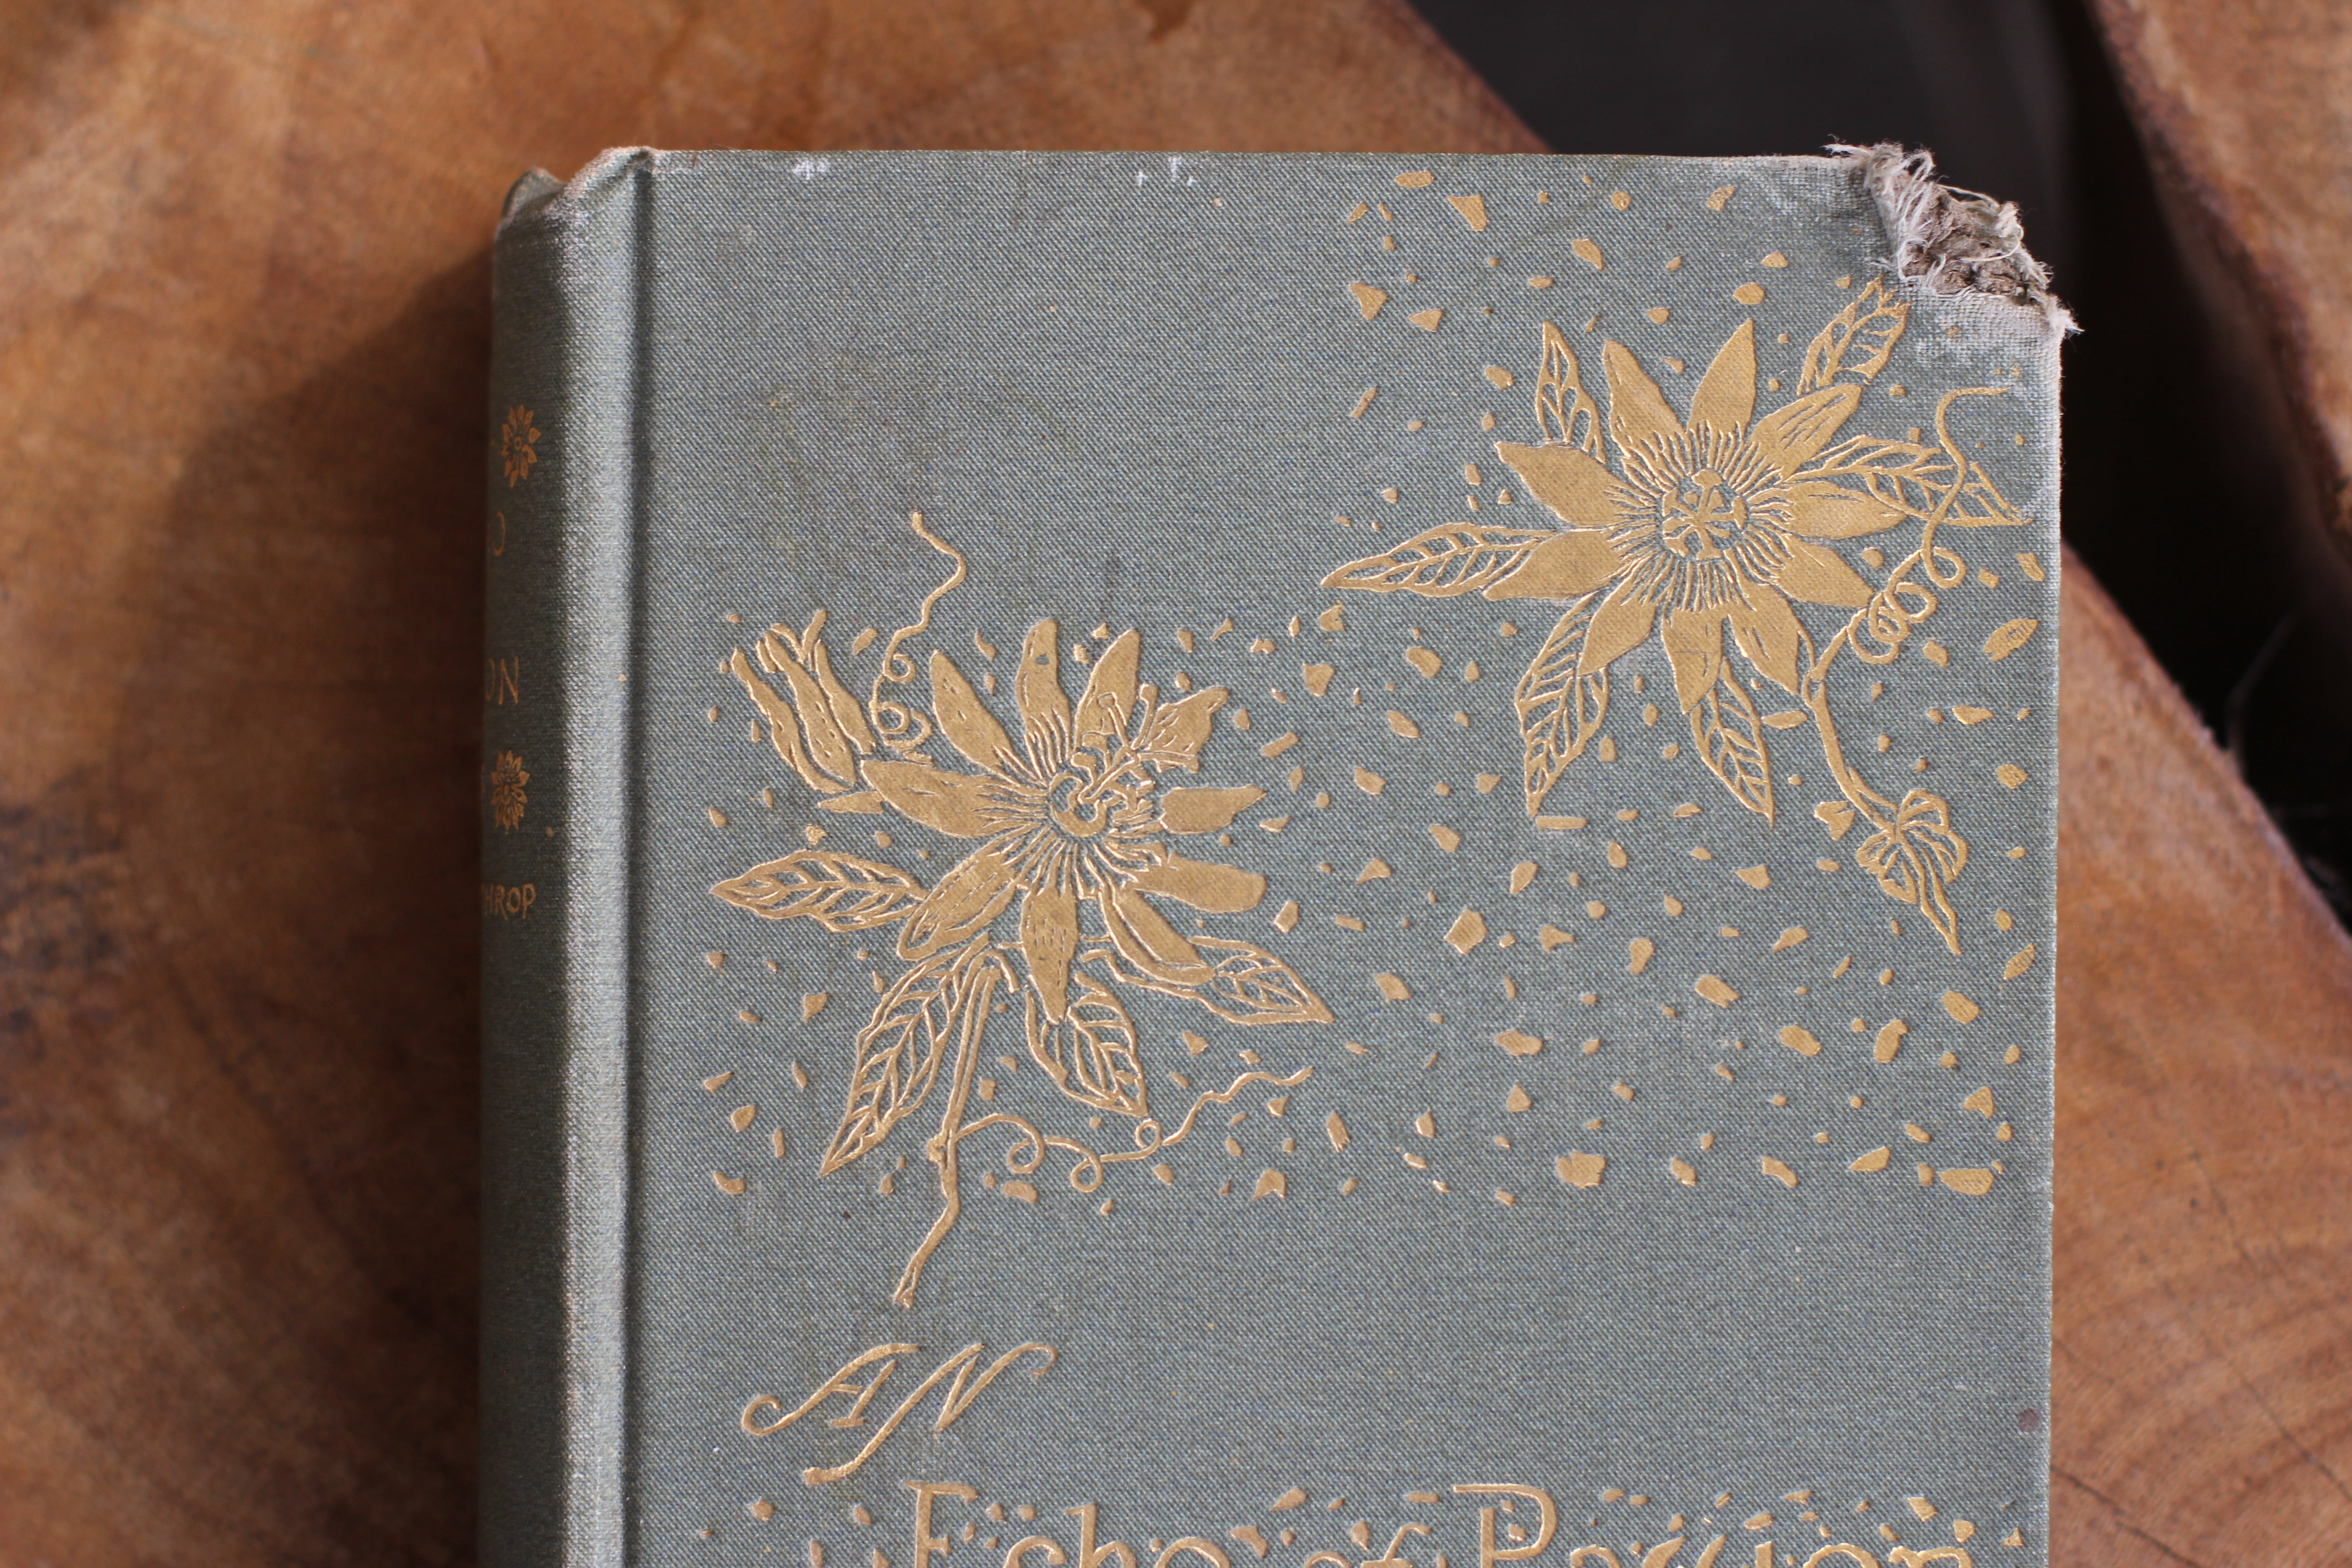 Antique Book: 1882 First Editin Book: An Echo Of Passion By George P. Lathrop, Boston HC. Hardback.